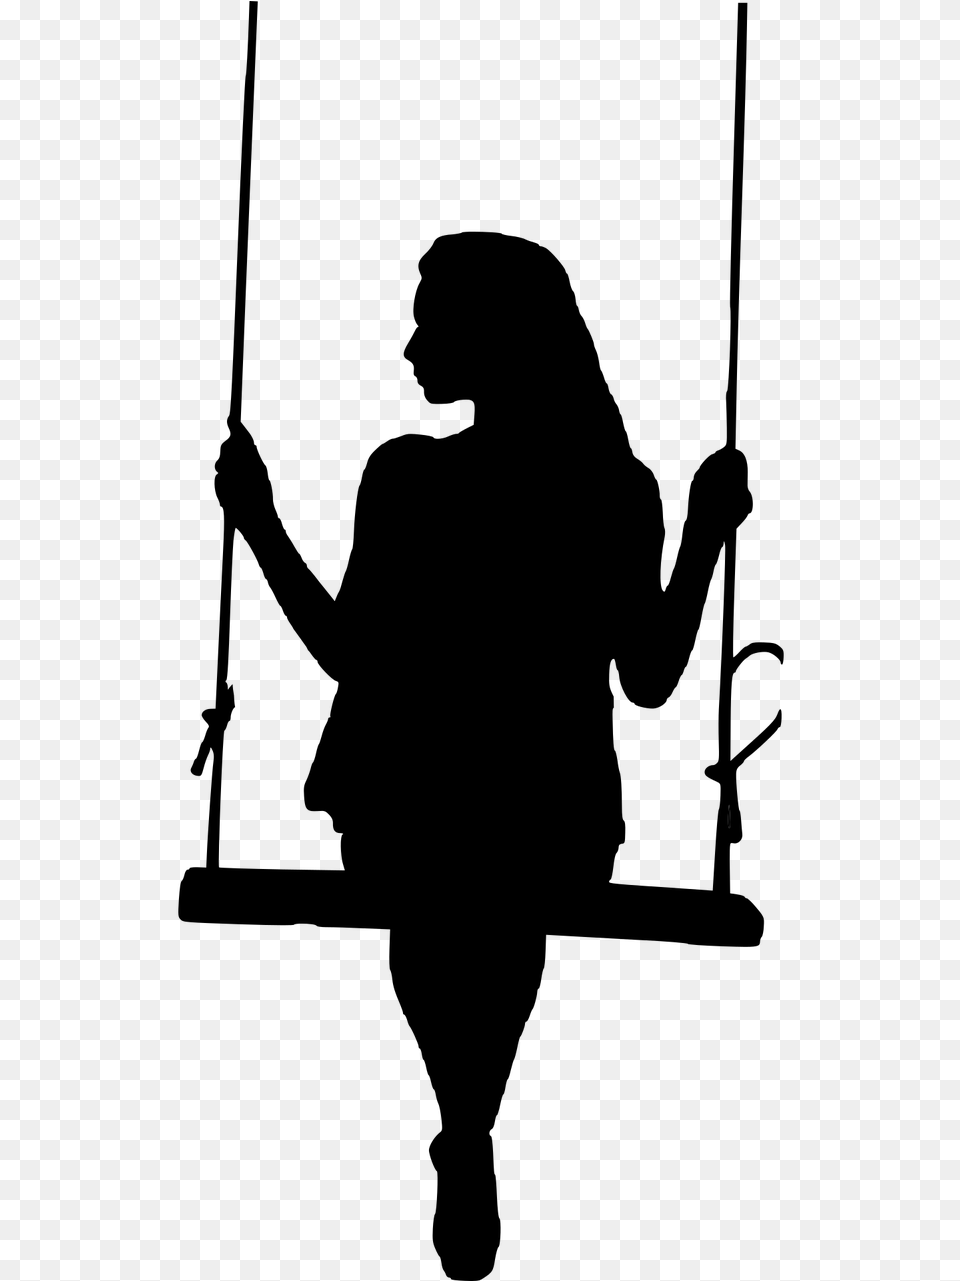 Girl On A Swing Silhouette Silhouette Of A Girl On A Swing, Gray Png Image